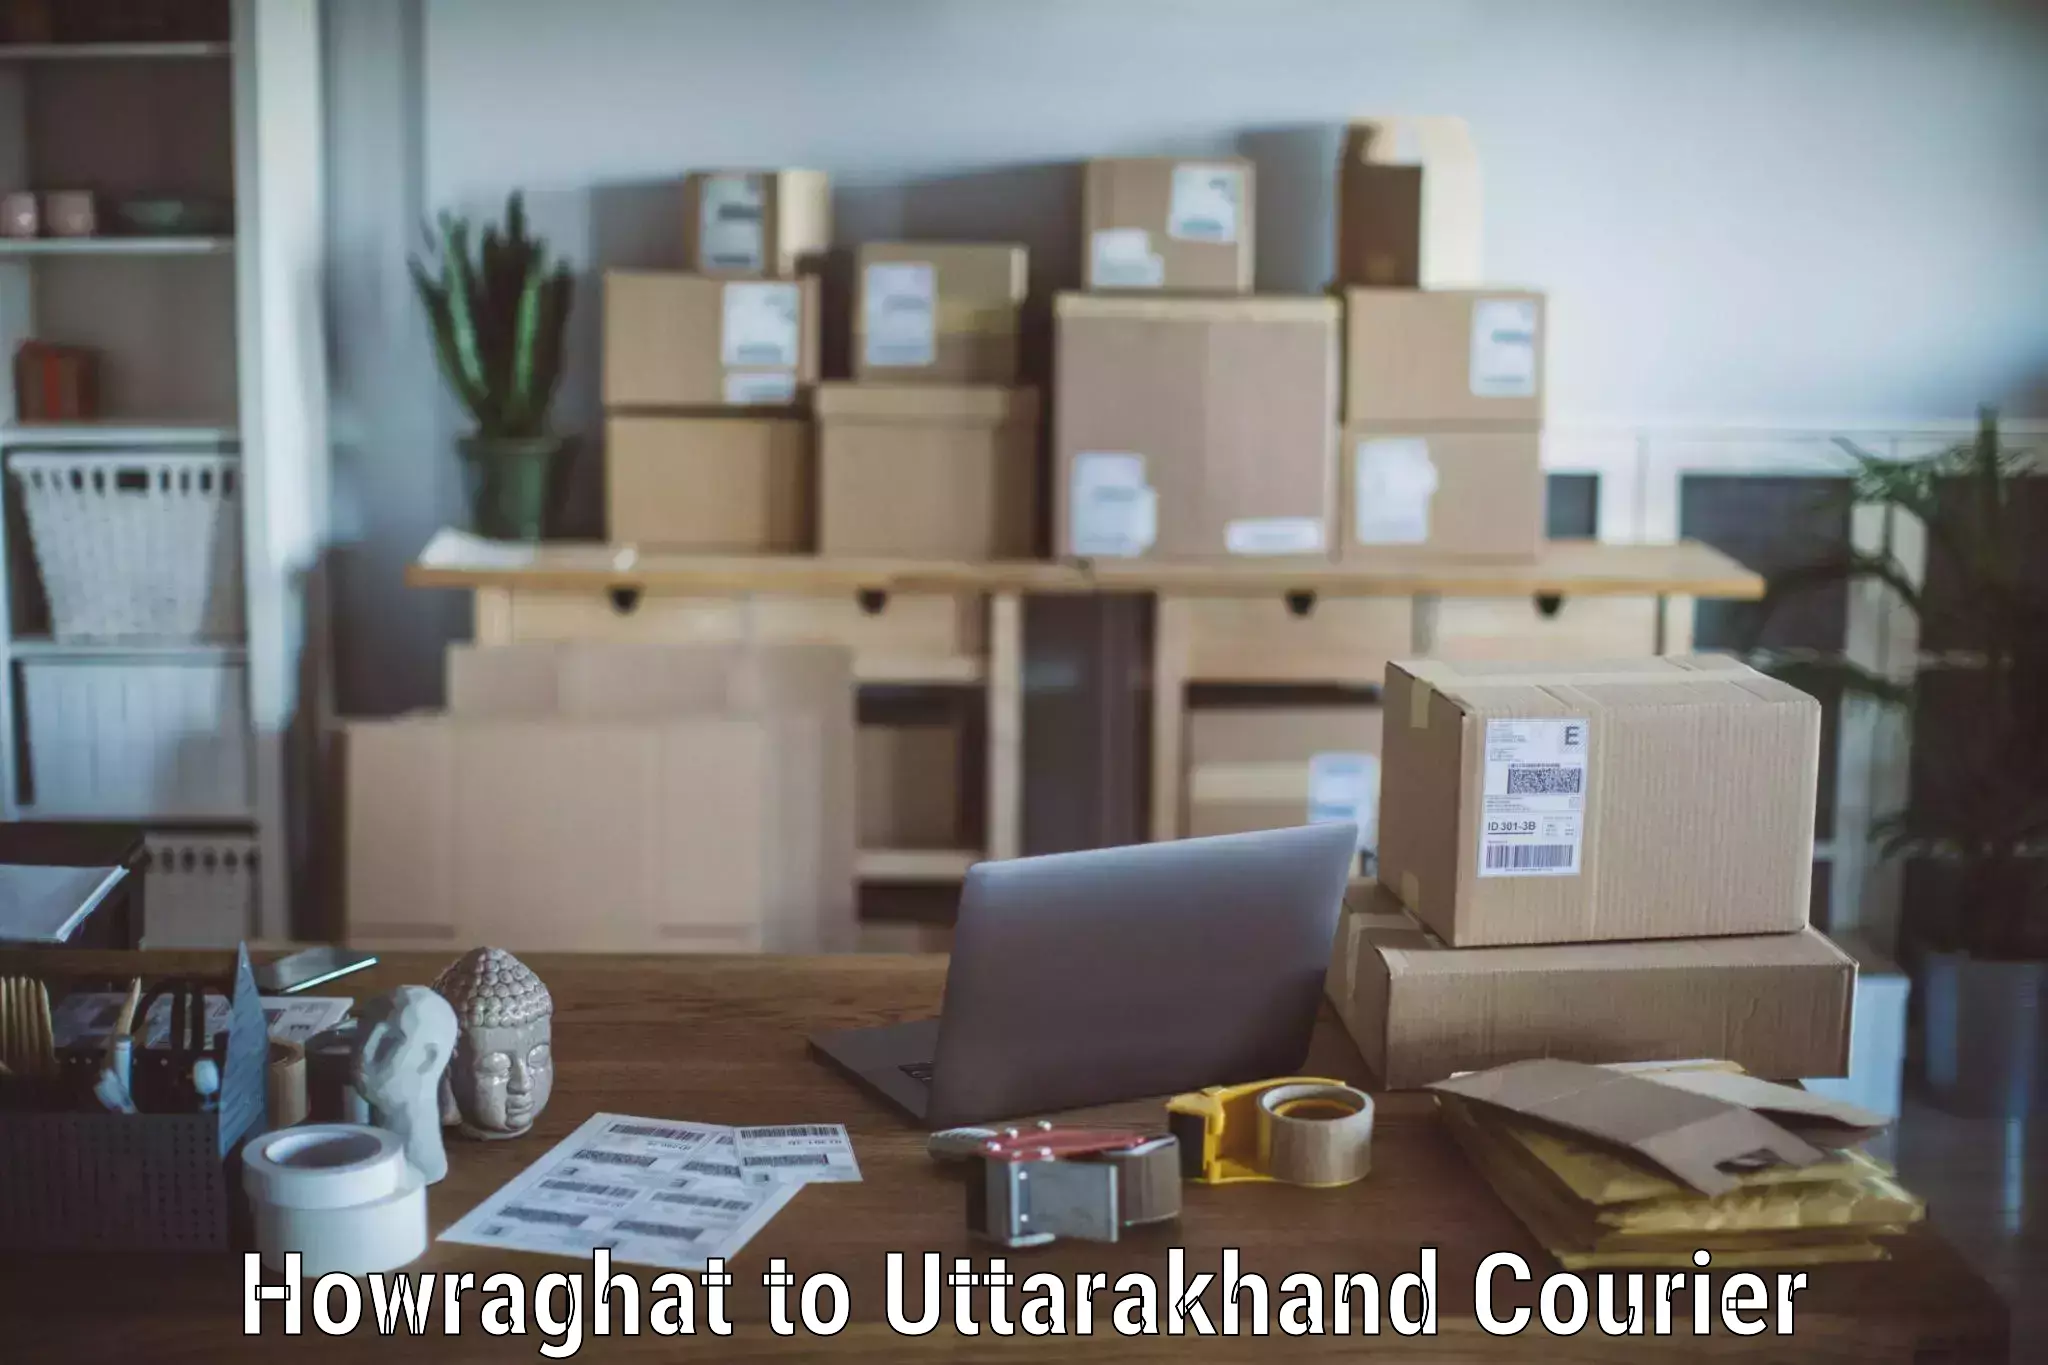 Trusted moving company Howraghat to Bhimtal